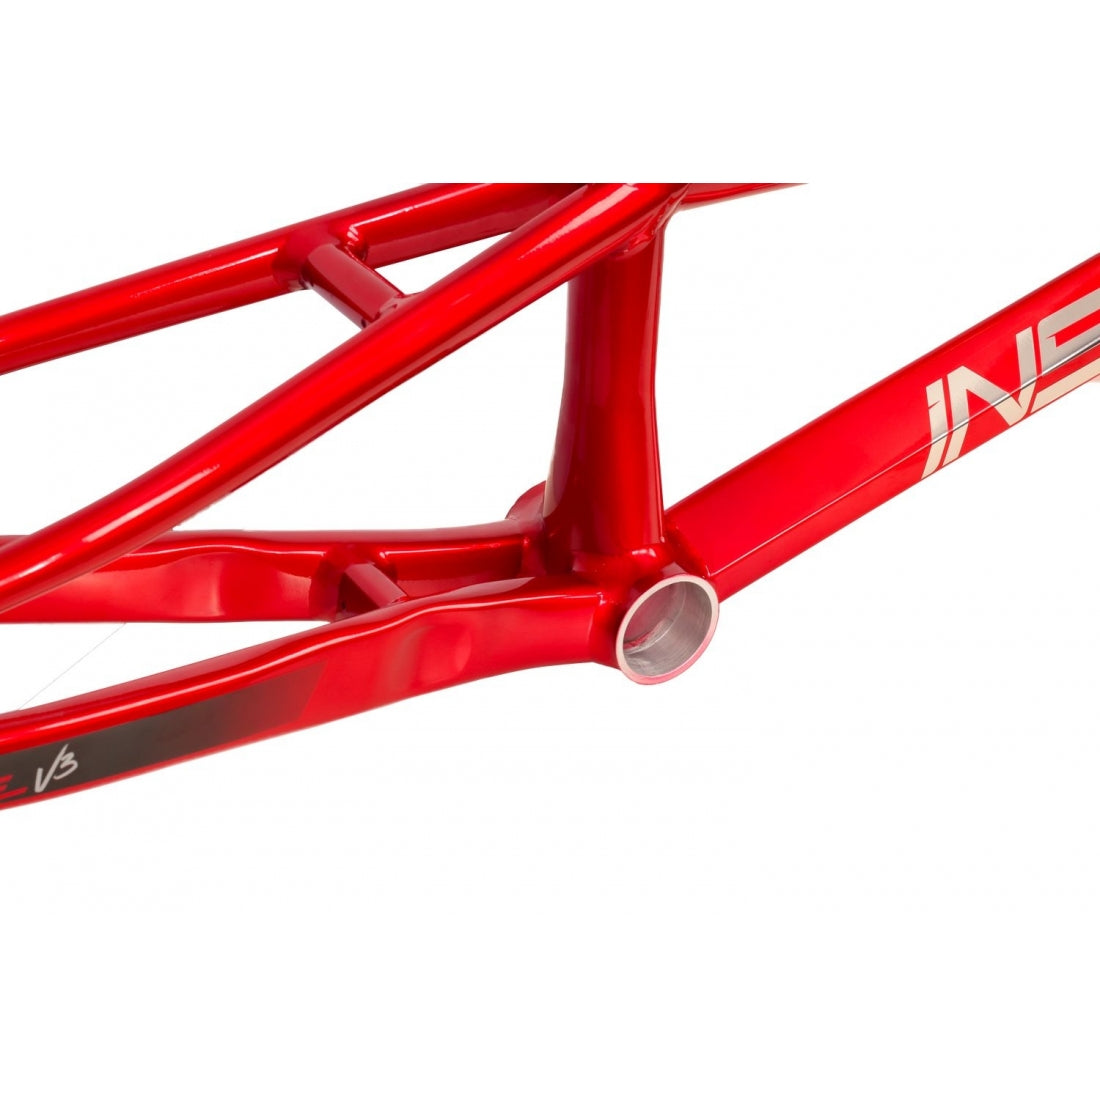 Close-up of a red Inspyre Concorde V3 Pro XL BMX Race frame displaying the seat stay, chain stay, and bottom bracket area.